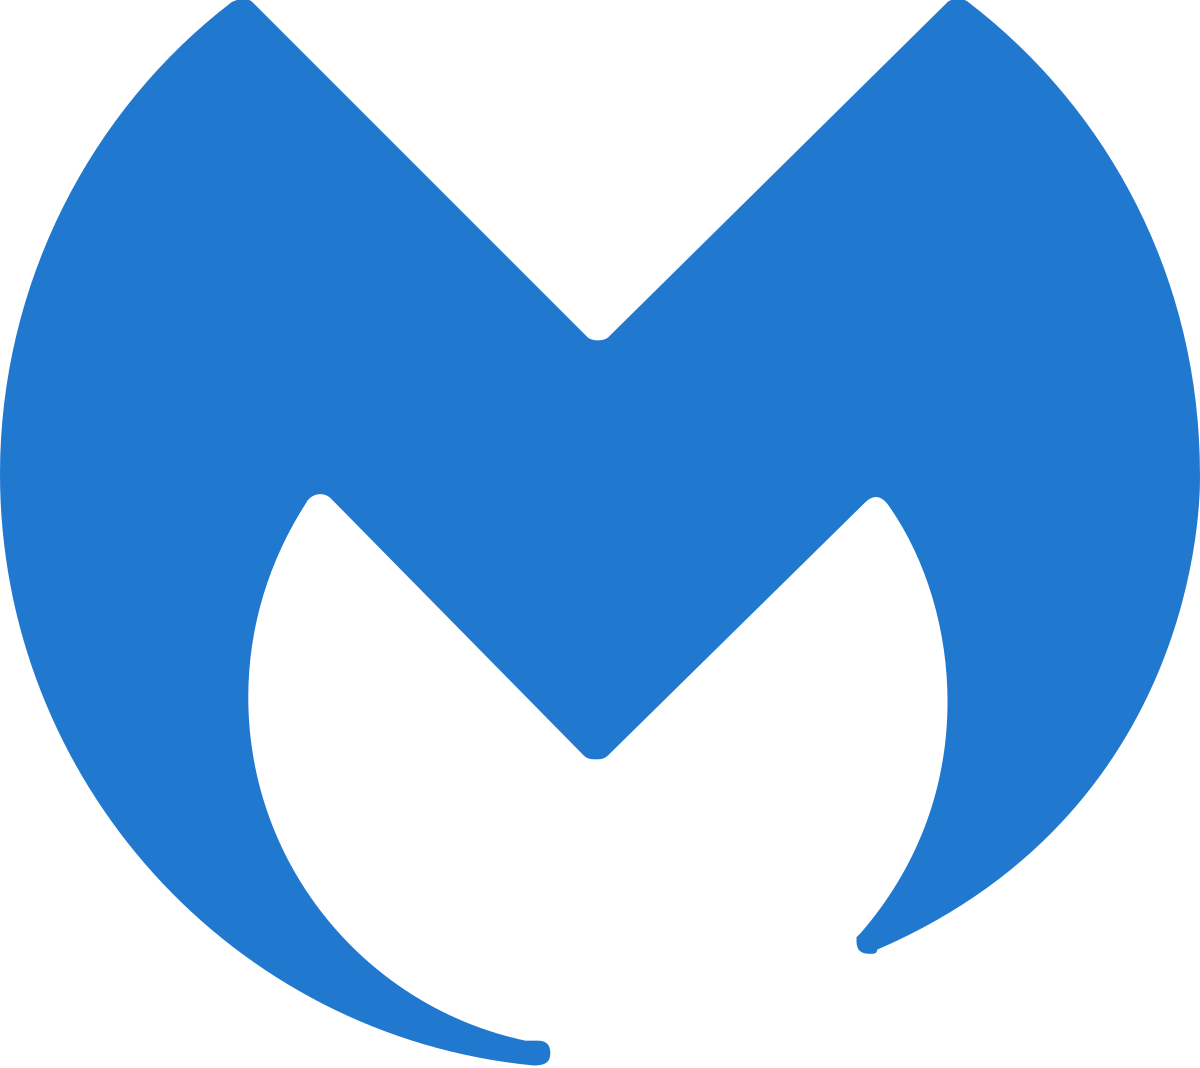 Malwarebytes Endpoint Protection & Response - Subscription License (1 Year)